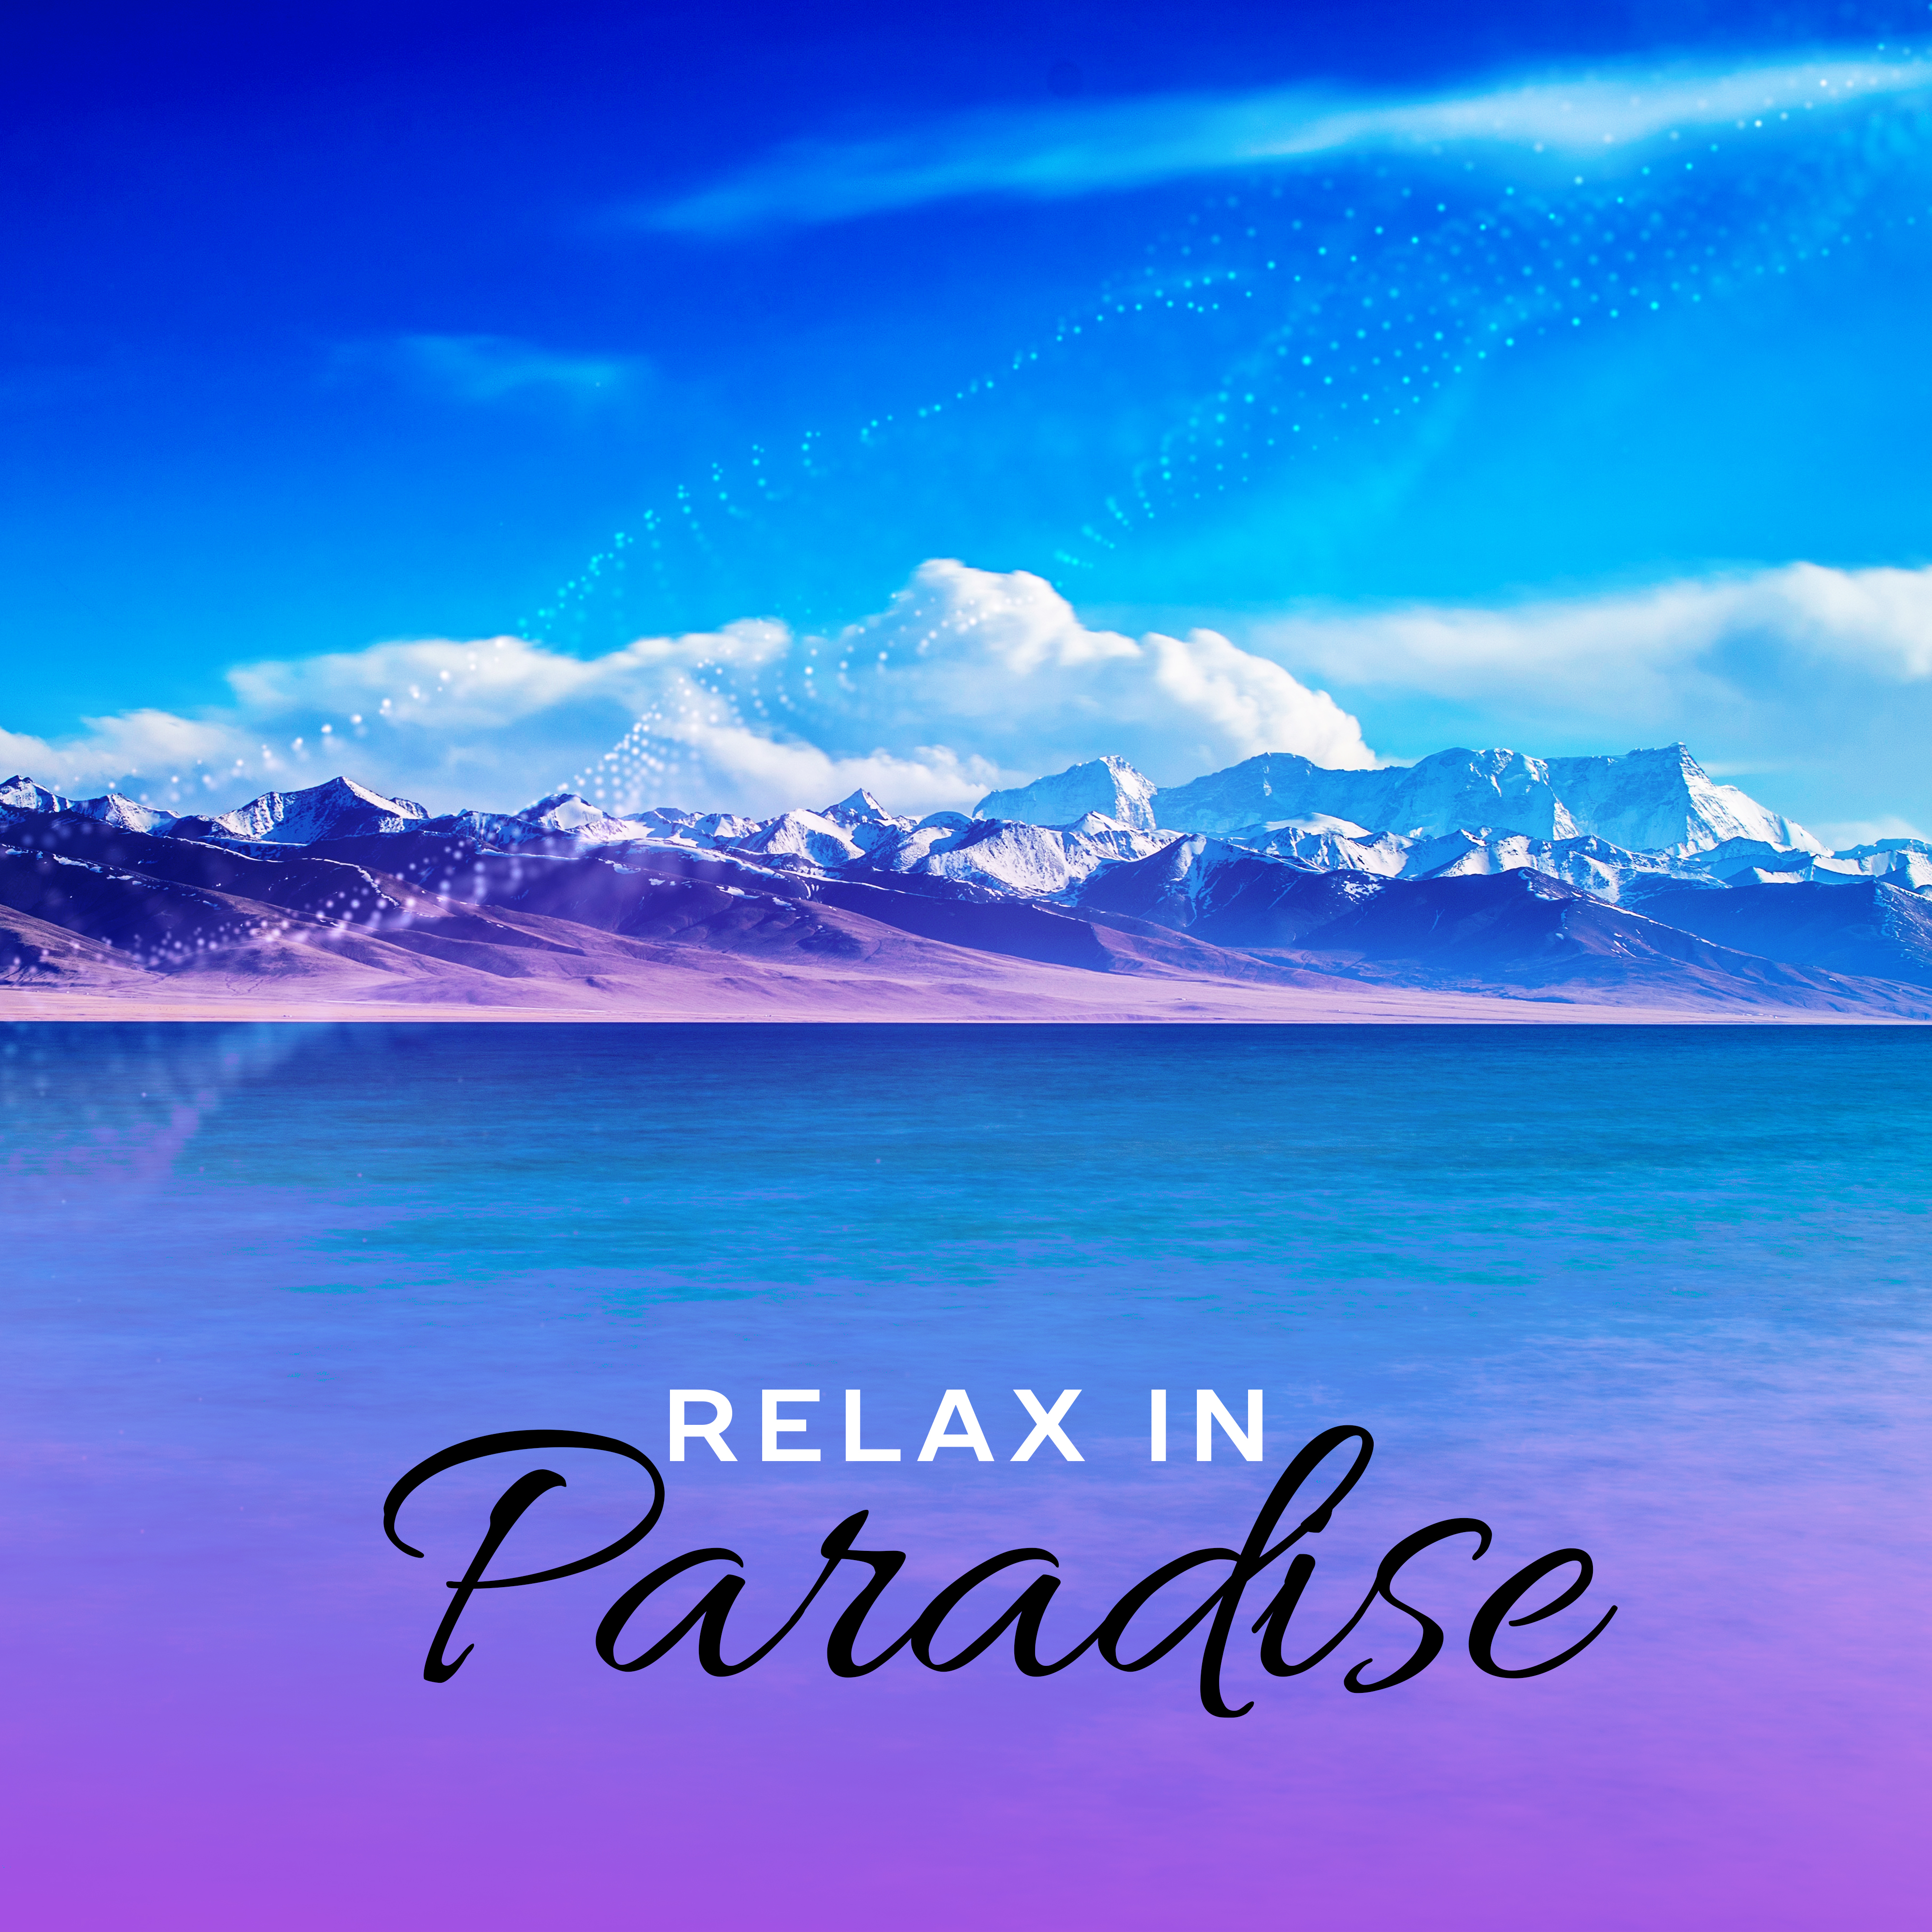 Relax in Paradise – Beach Music, Deep Rest, Summer Chill Out, Holiday Vibes, Ibiza Summertime, Calm Down